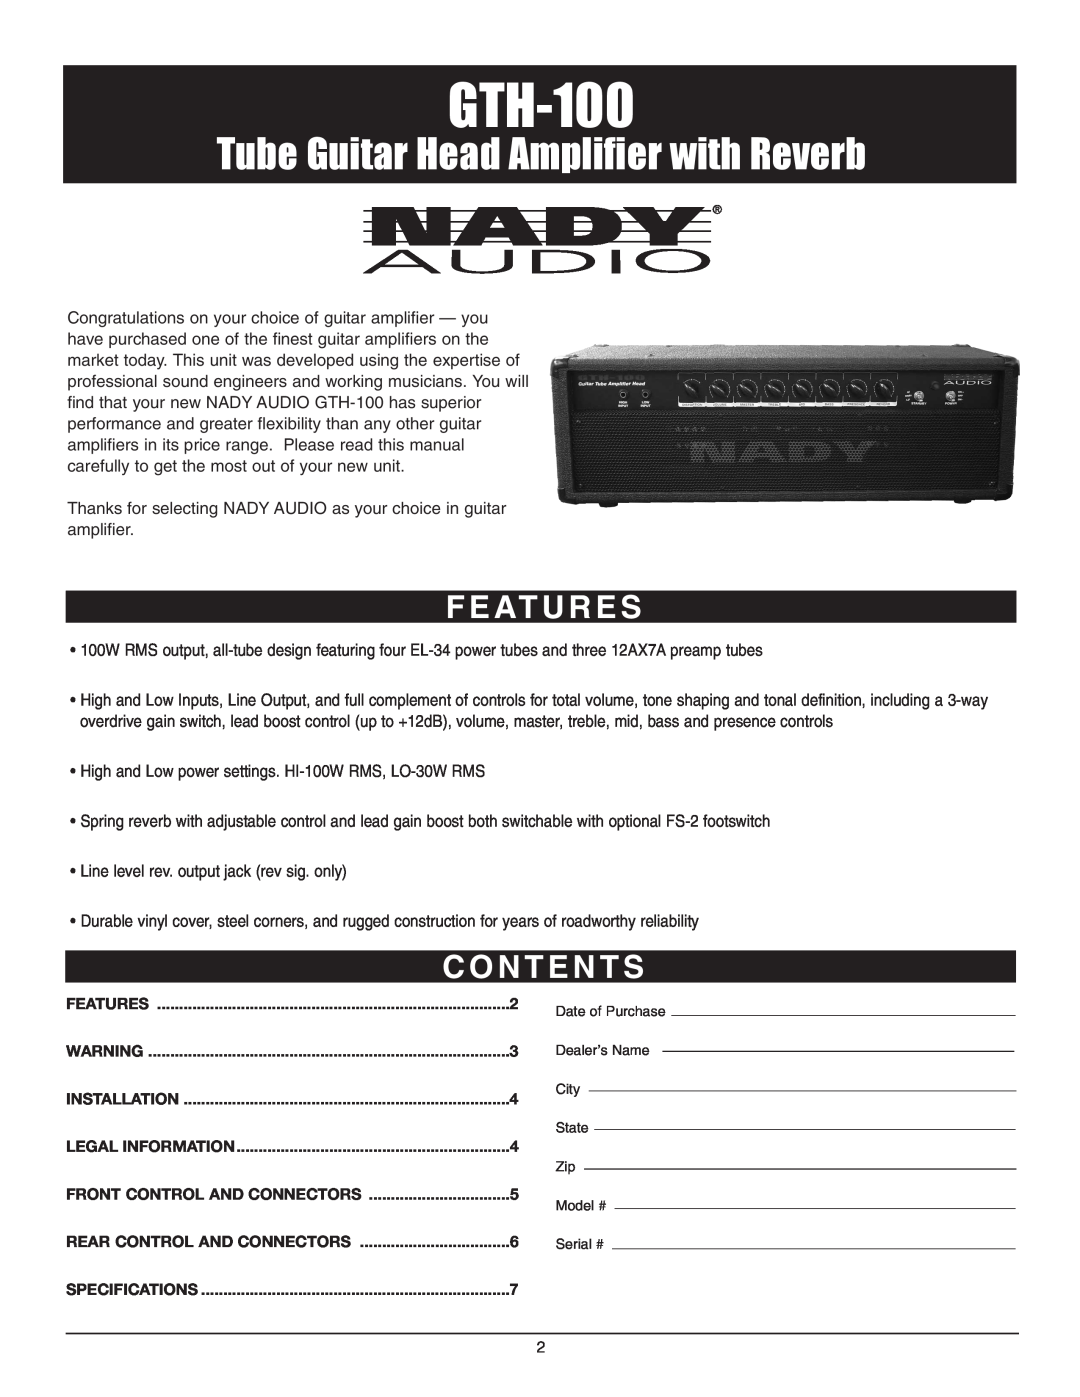 Nady Systems GTH-100 owner manual F E At U R E S, C O N T E N T S, Tube Guitar Head Amplifier with Reverb 